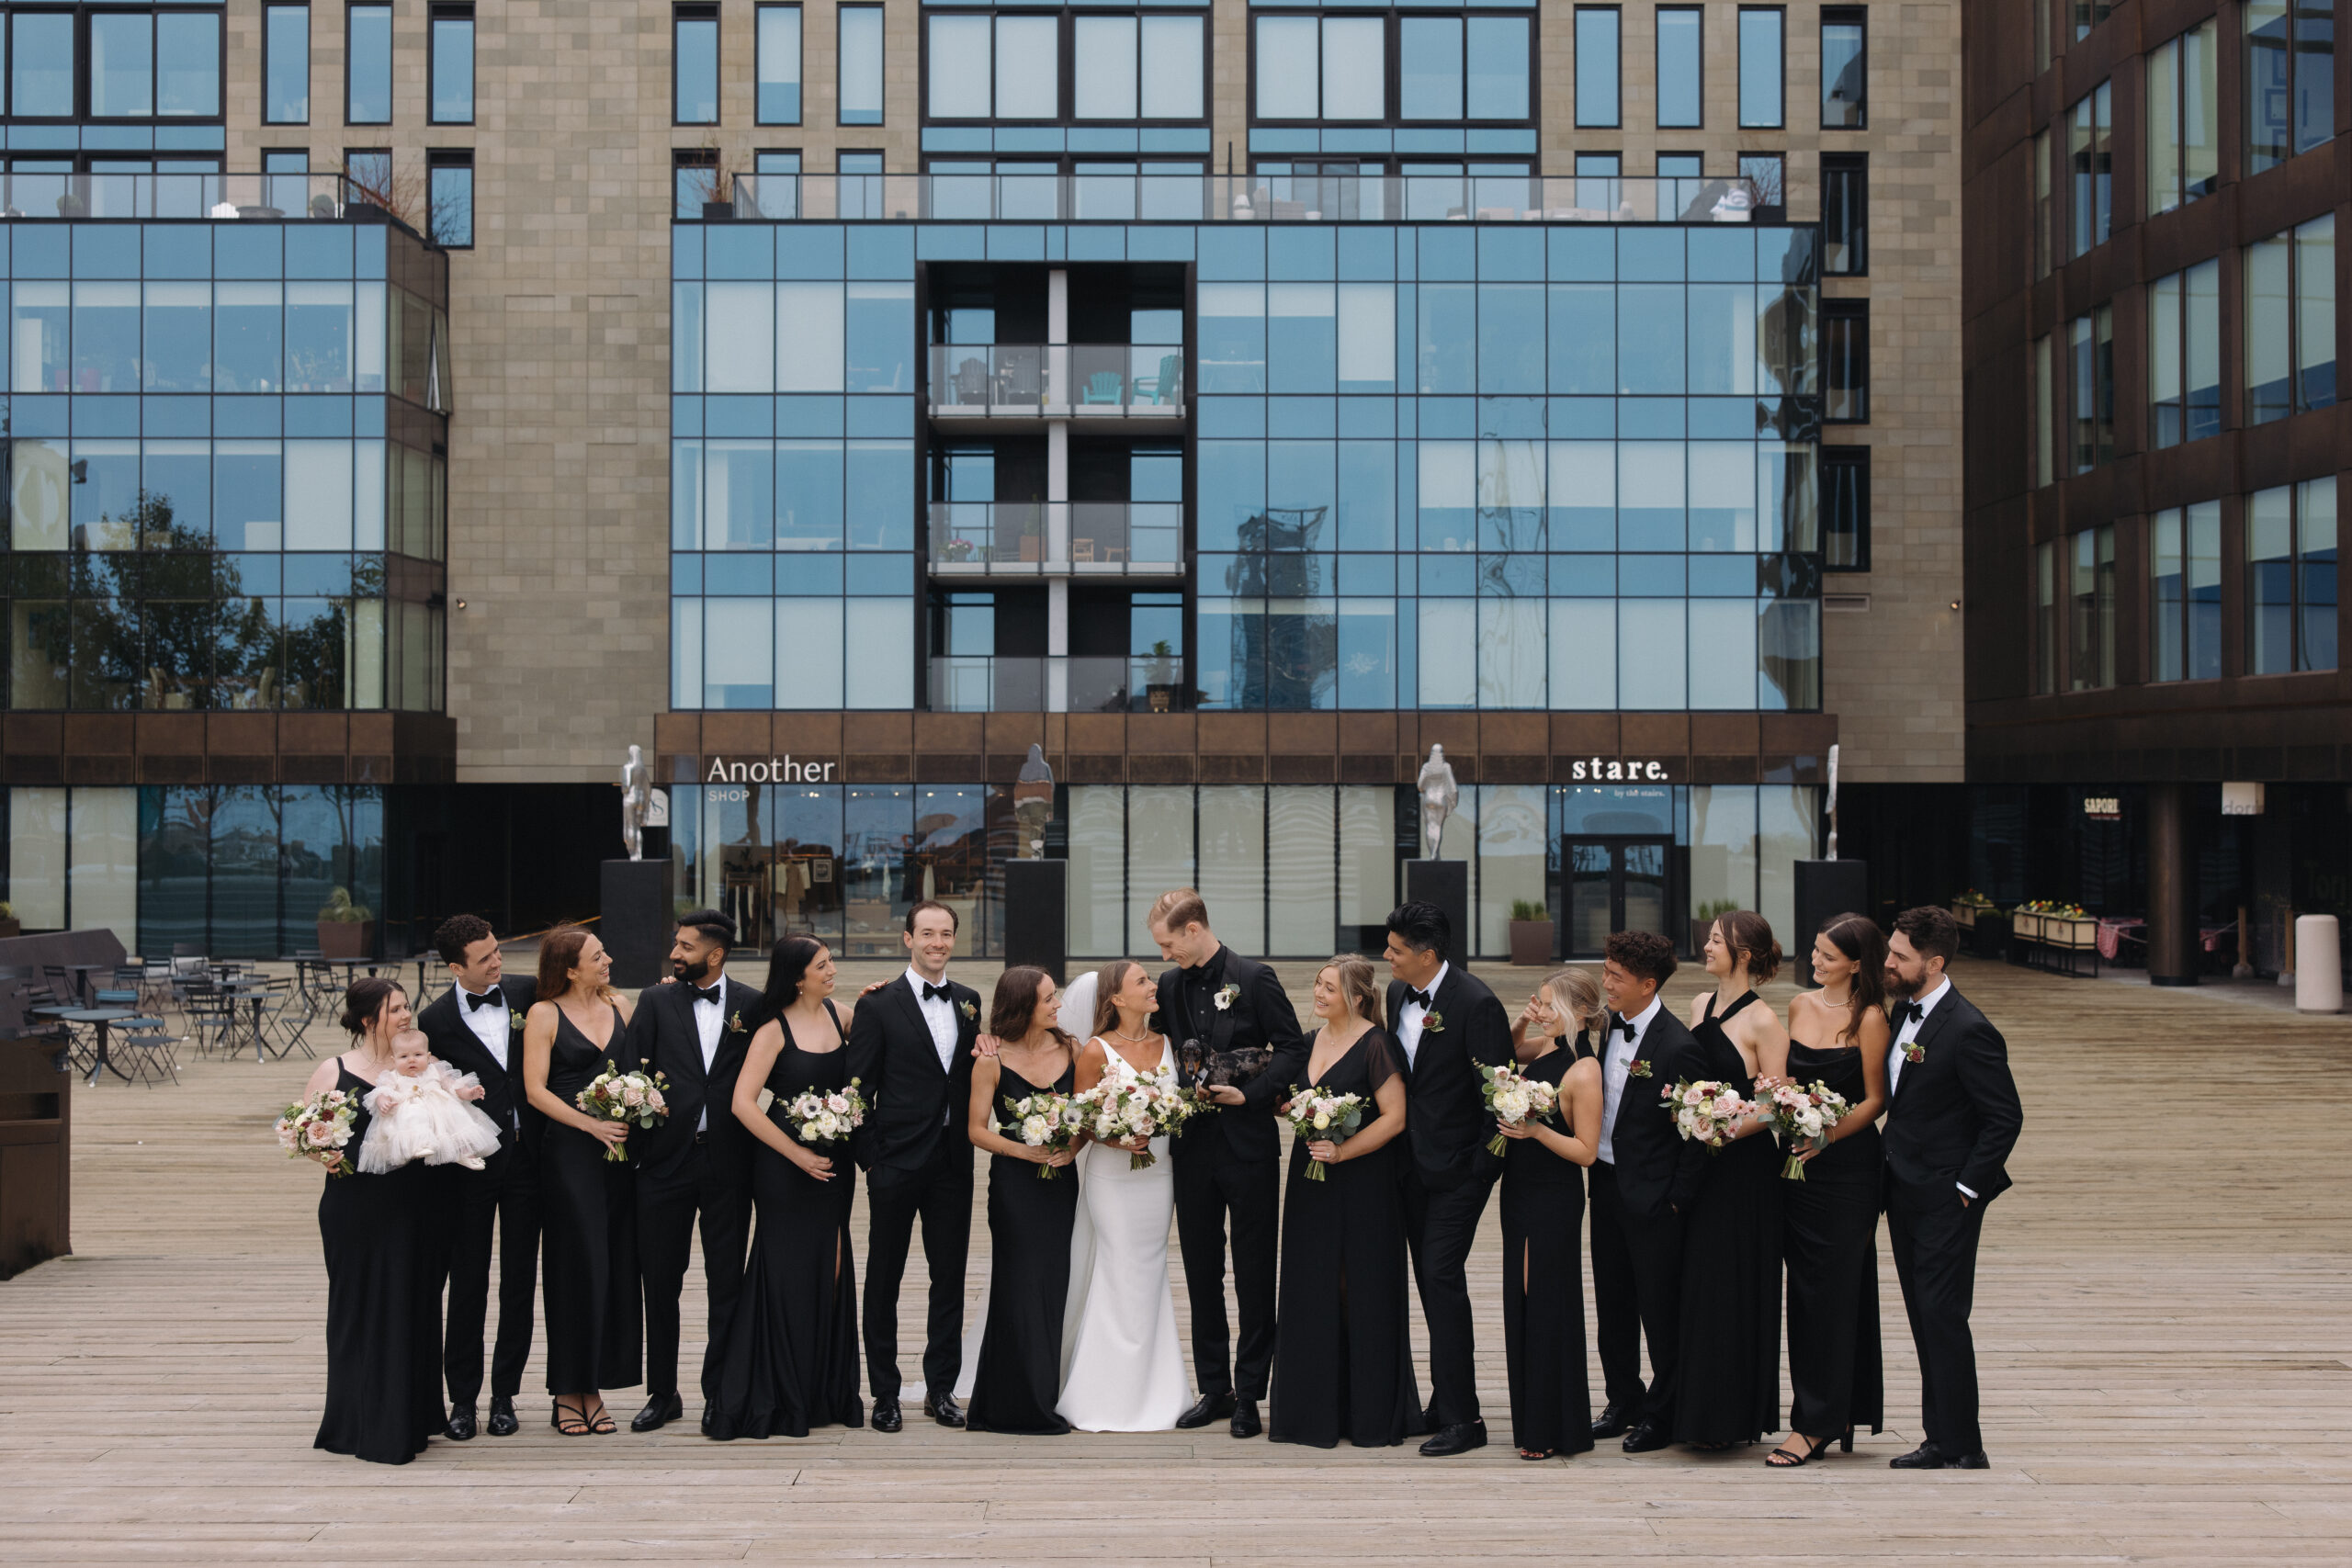 M&A's Waterfront Wedding at The Cable Wharf